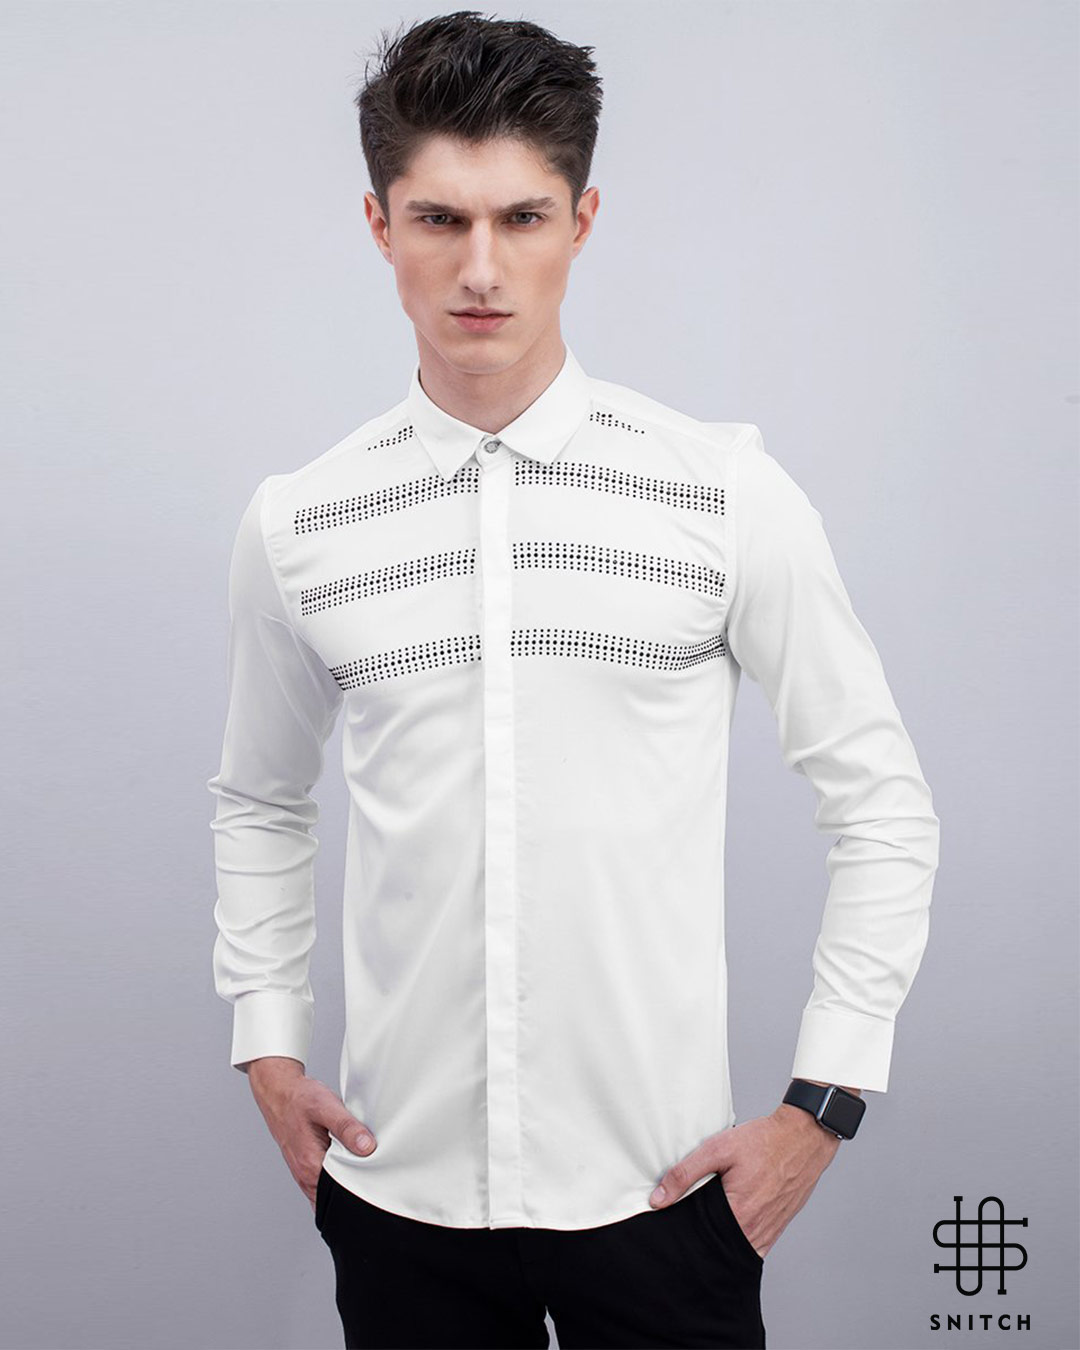 Buy Snitch Astral White Shirt for Men white Online at Bewakoof